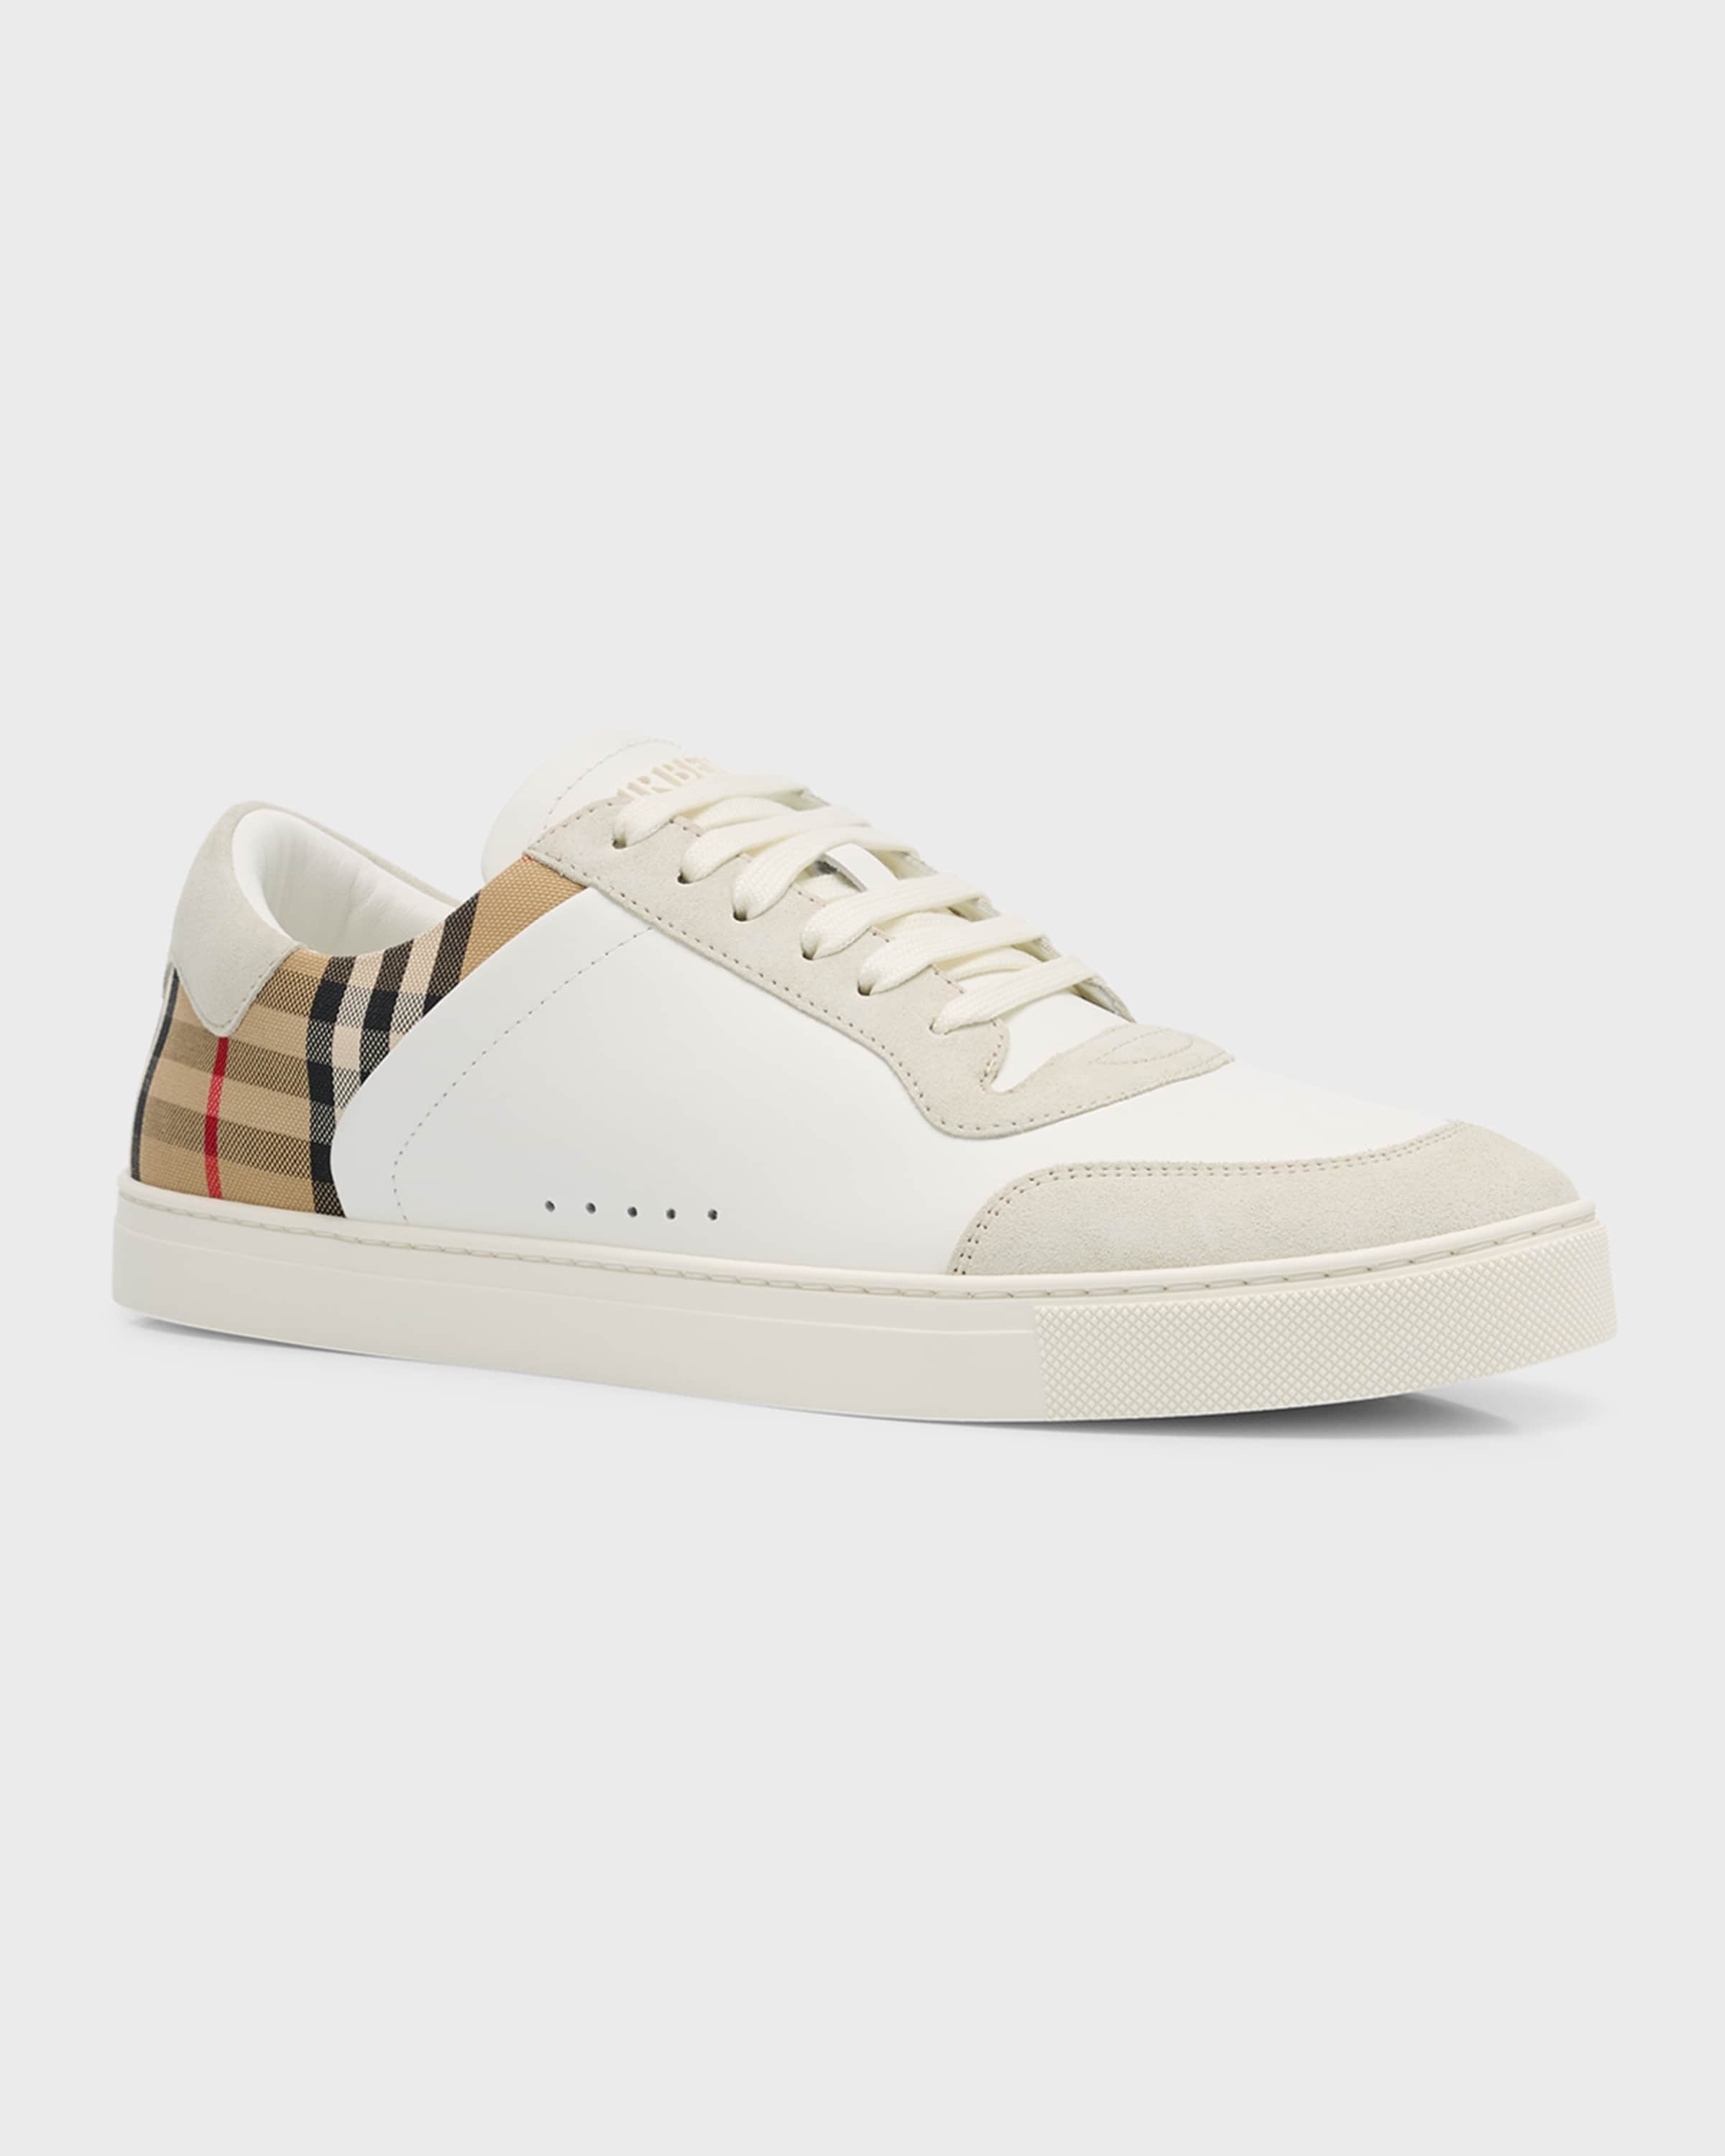 Men's Leather-Suede Check Sneakers - 3